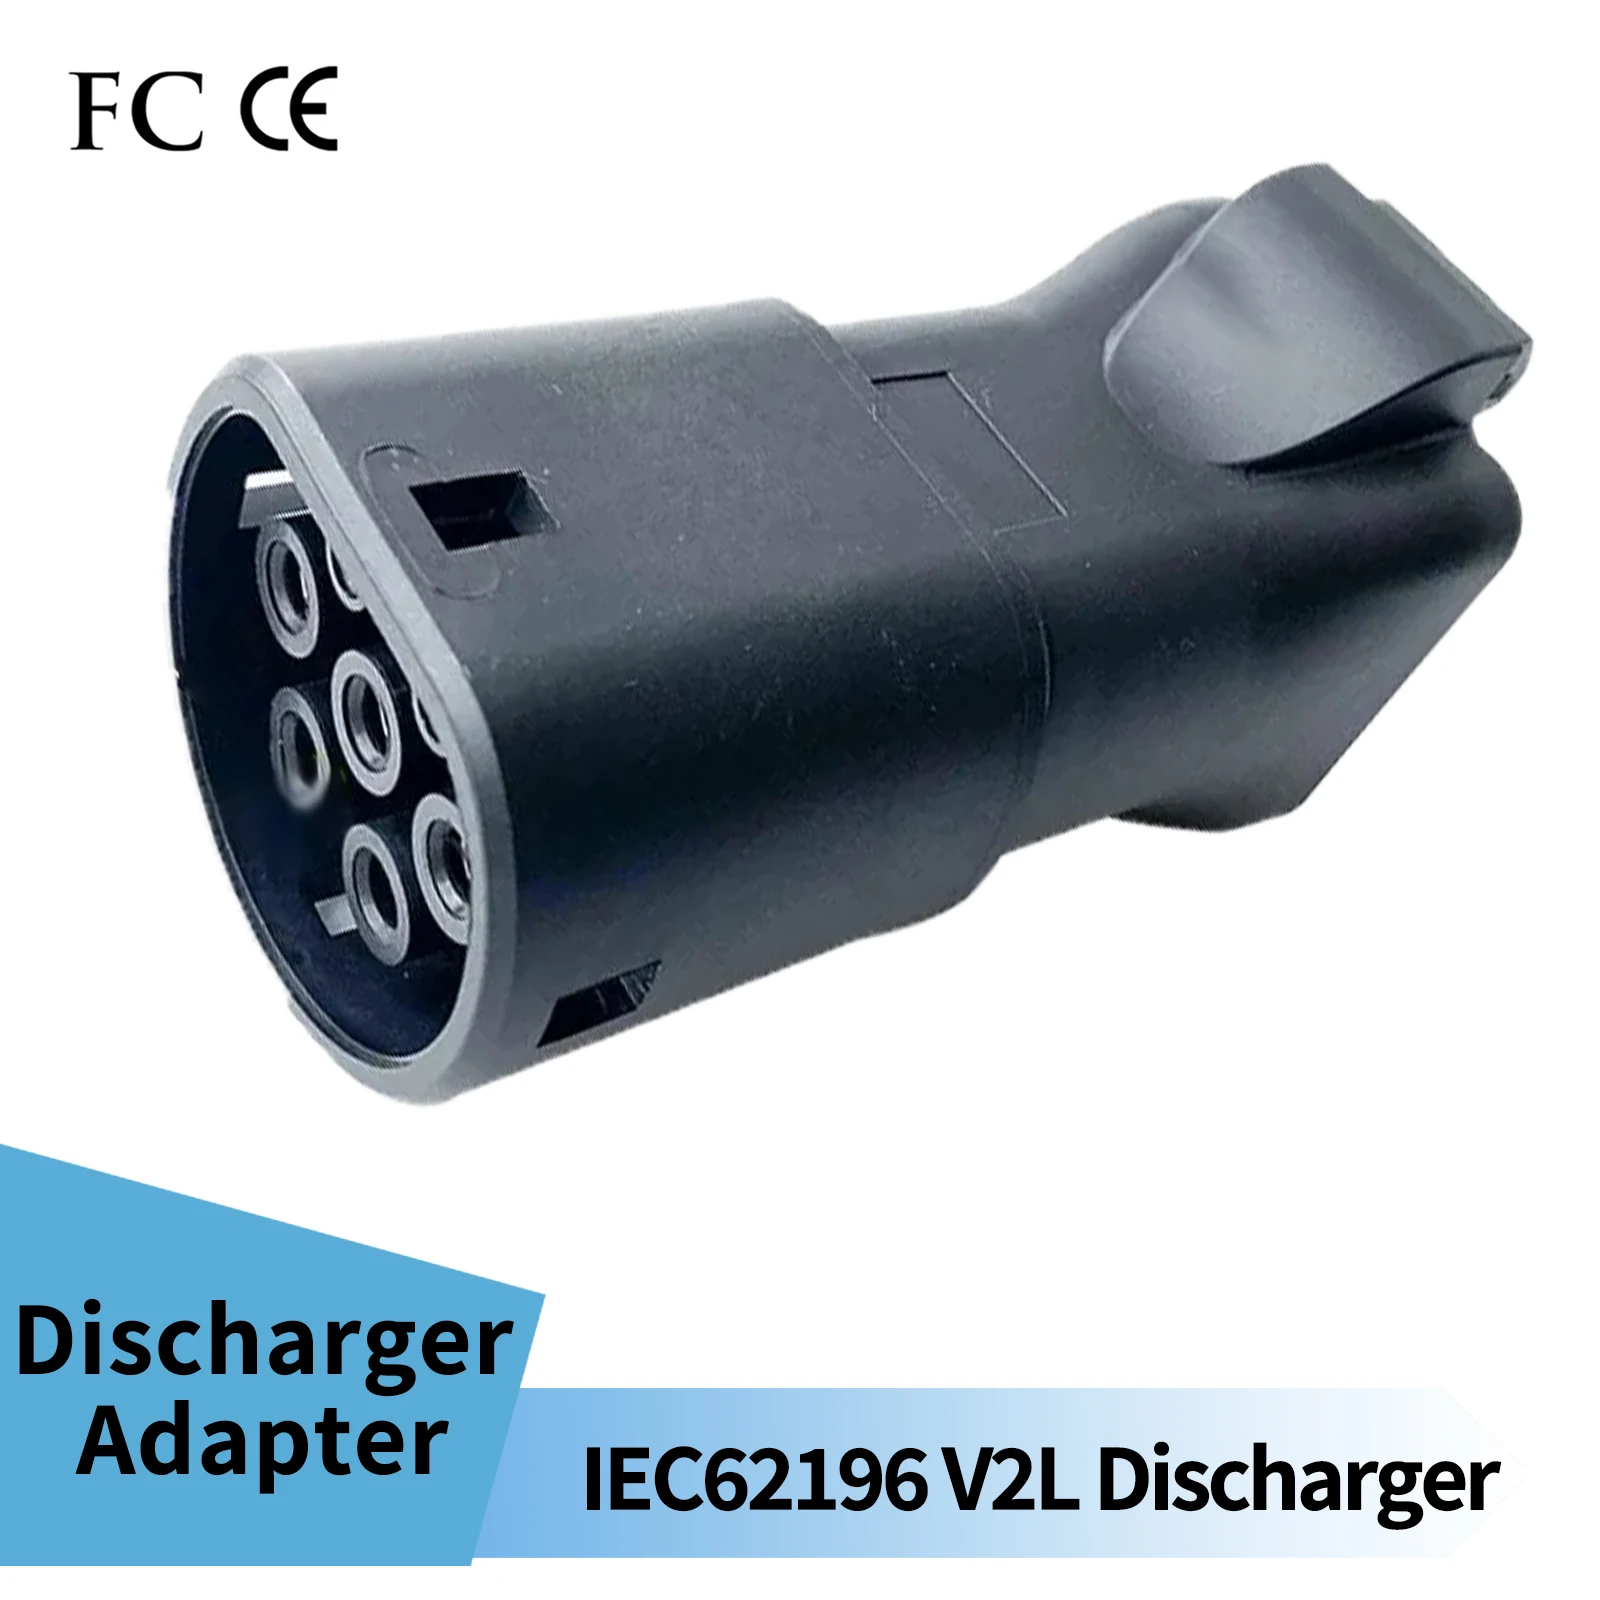 V2D V2L Adapter Vehicle With Type 2 Socket to Load Adapter  Adapter EU for MG4 MG5 KIA EV Discharger